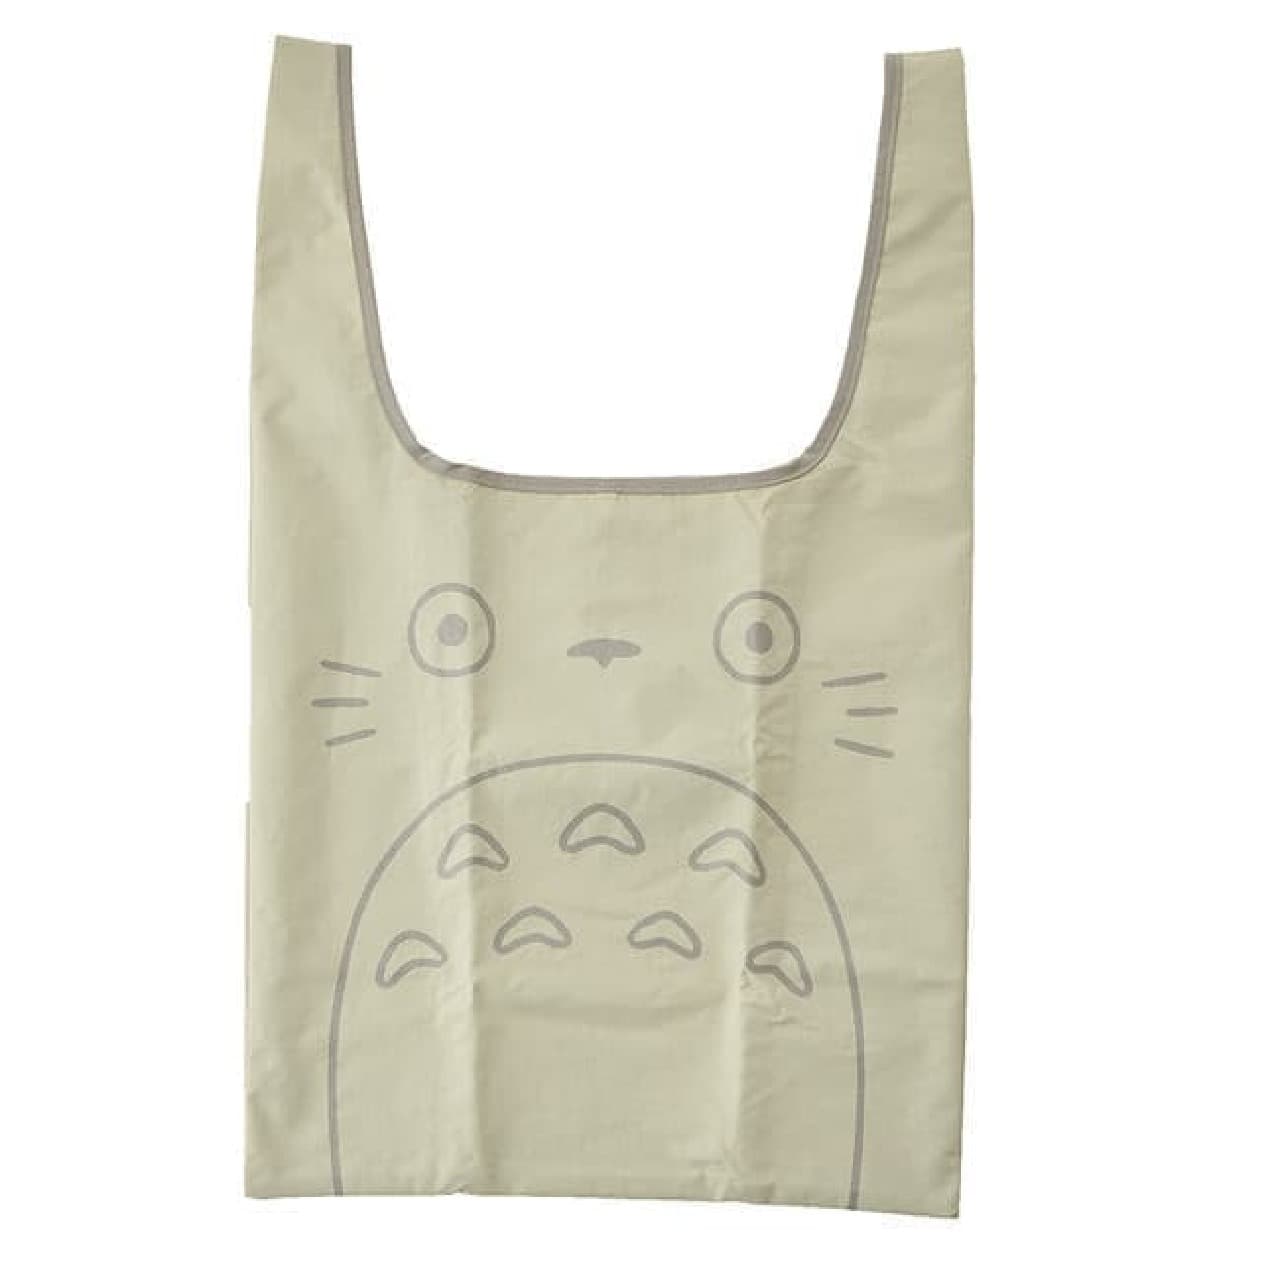 "Large Totoro Marche Eco Bag" at the post office --Small Totoro pouch with carabiner